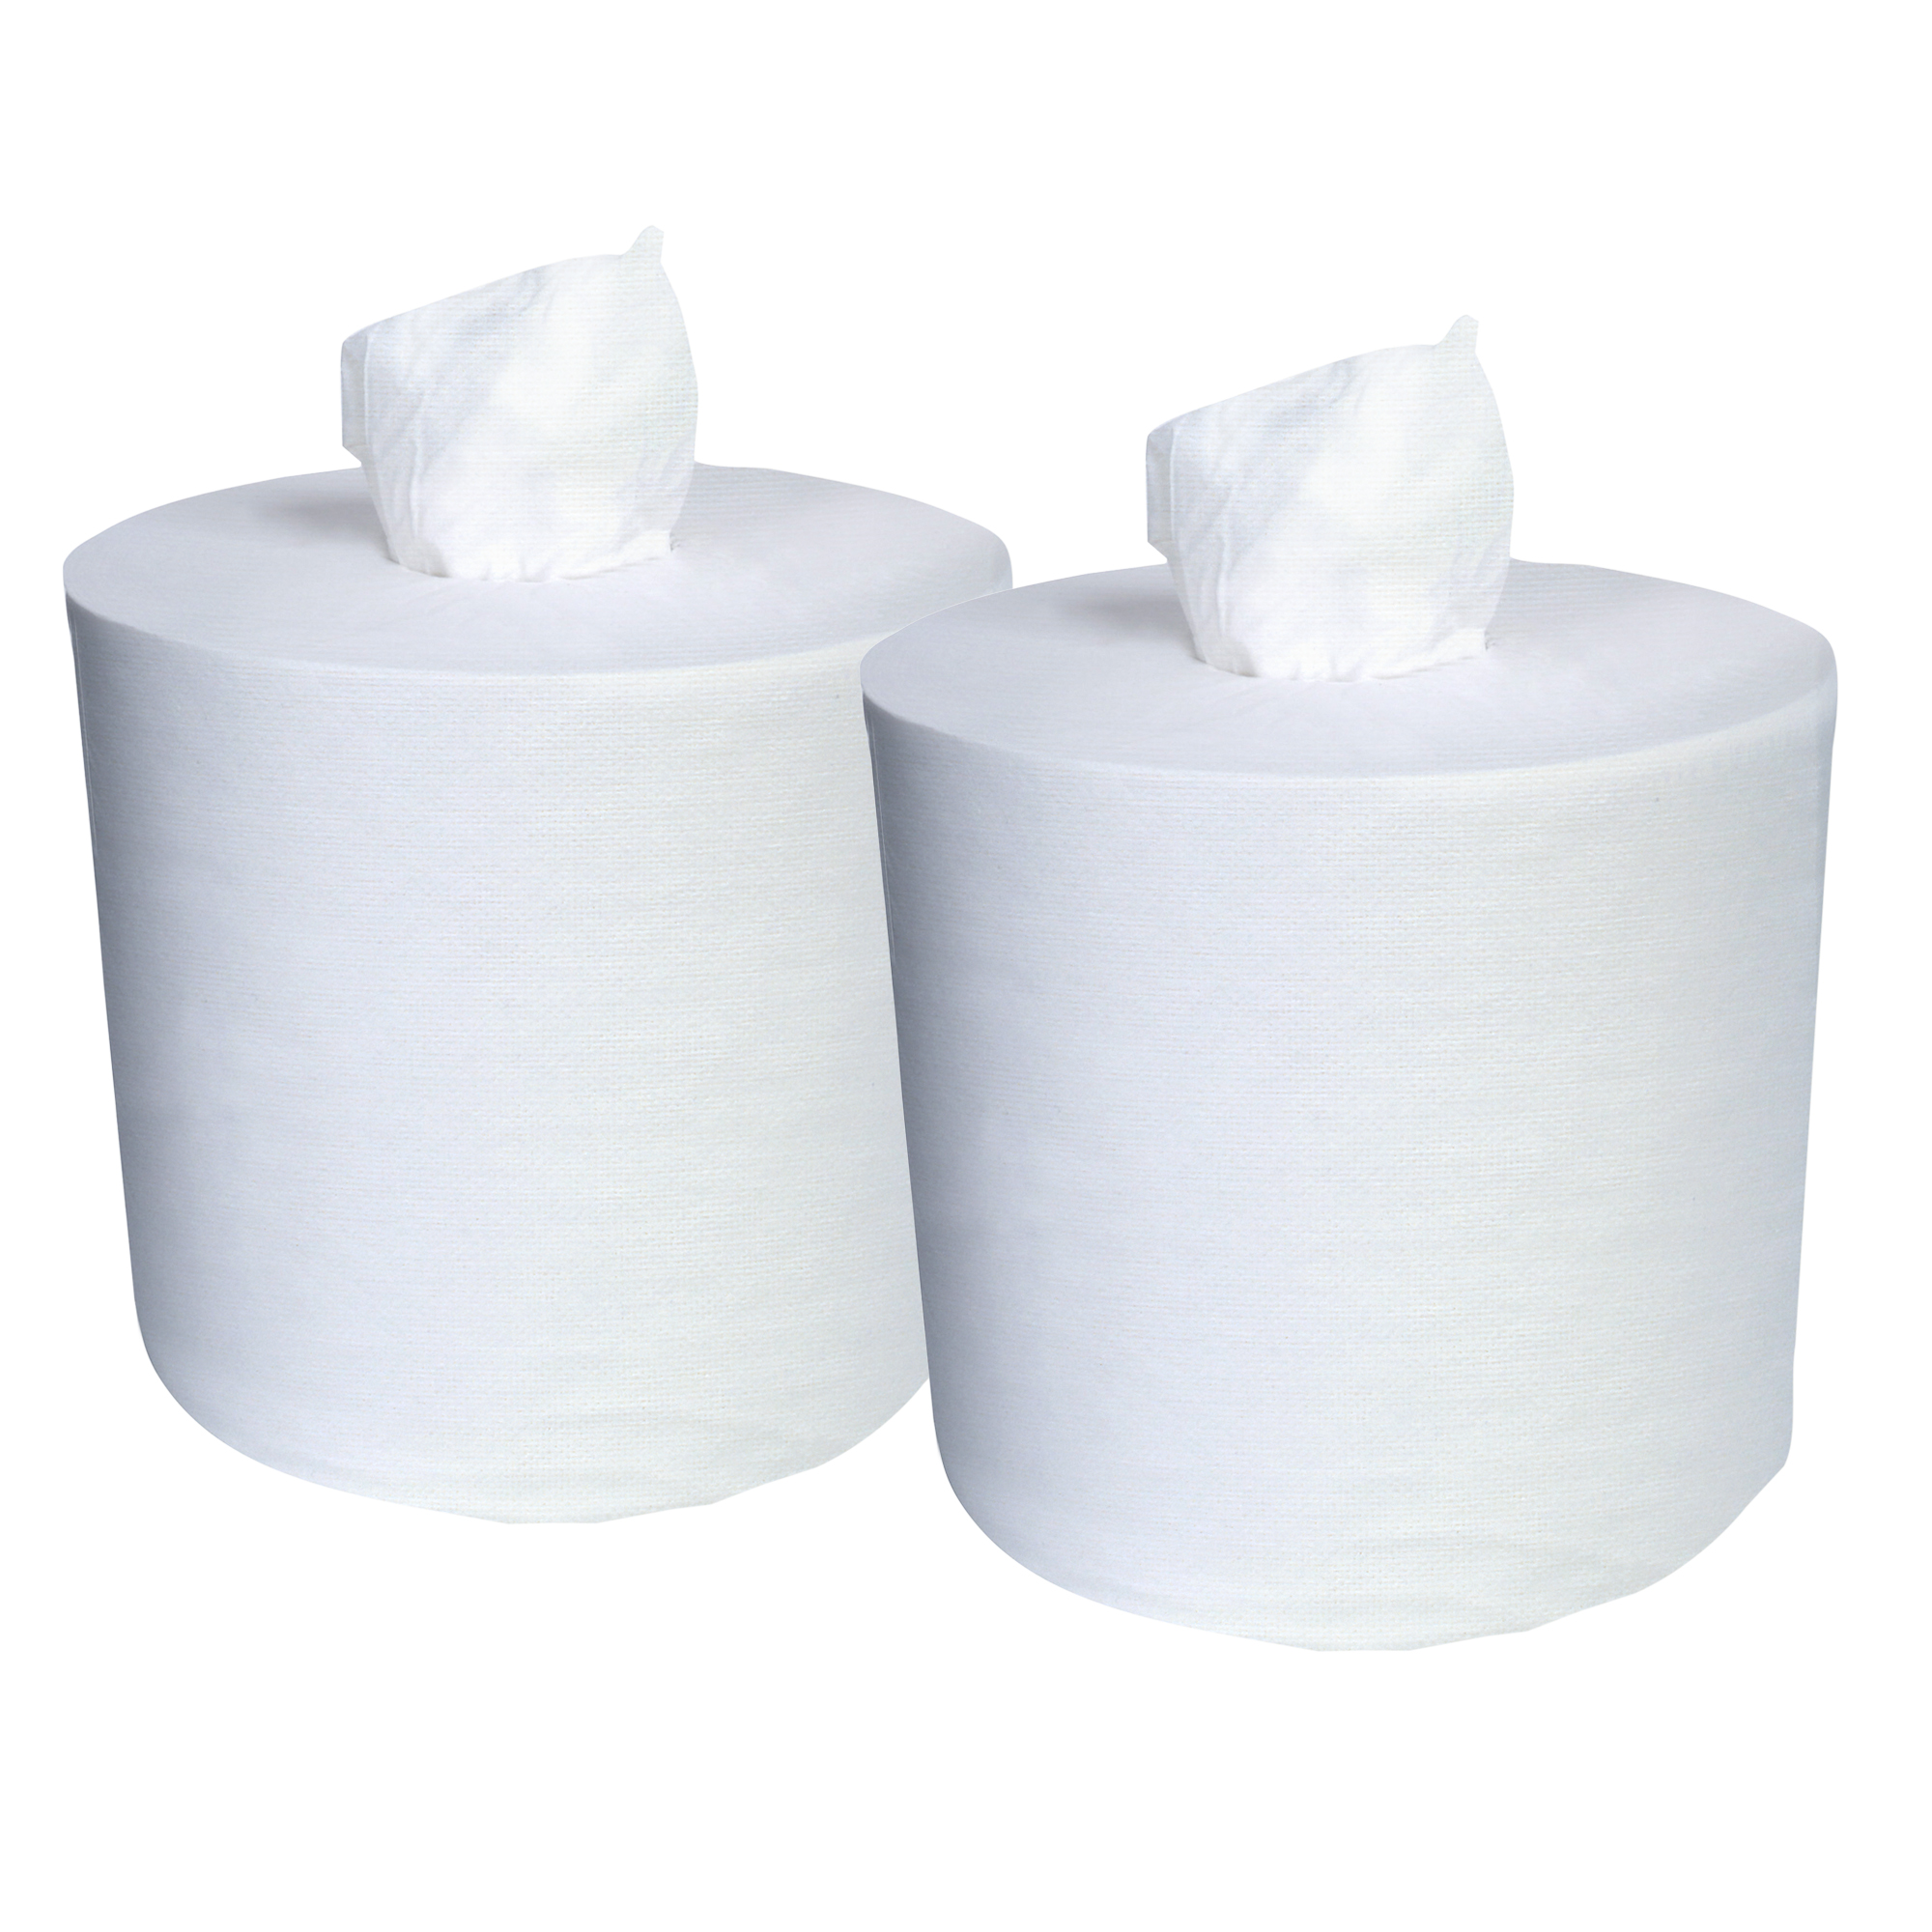 Picture of L30 Wipers, Center-Pull Roll, 9 4/5 x 15 1/5, White, 300/Roll, 2 Rolls/Carton